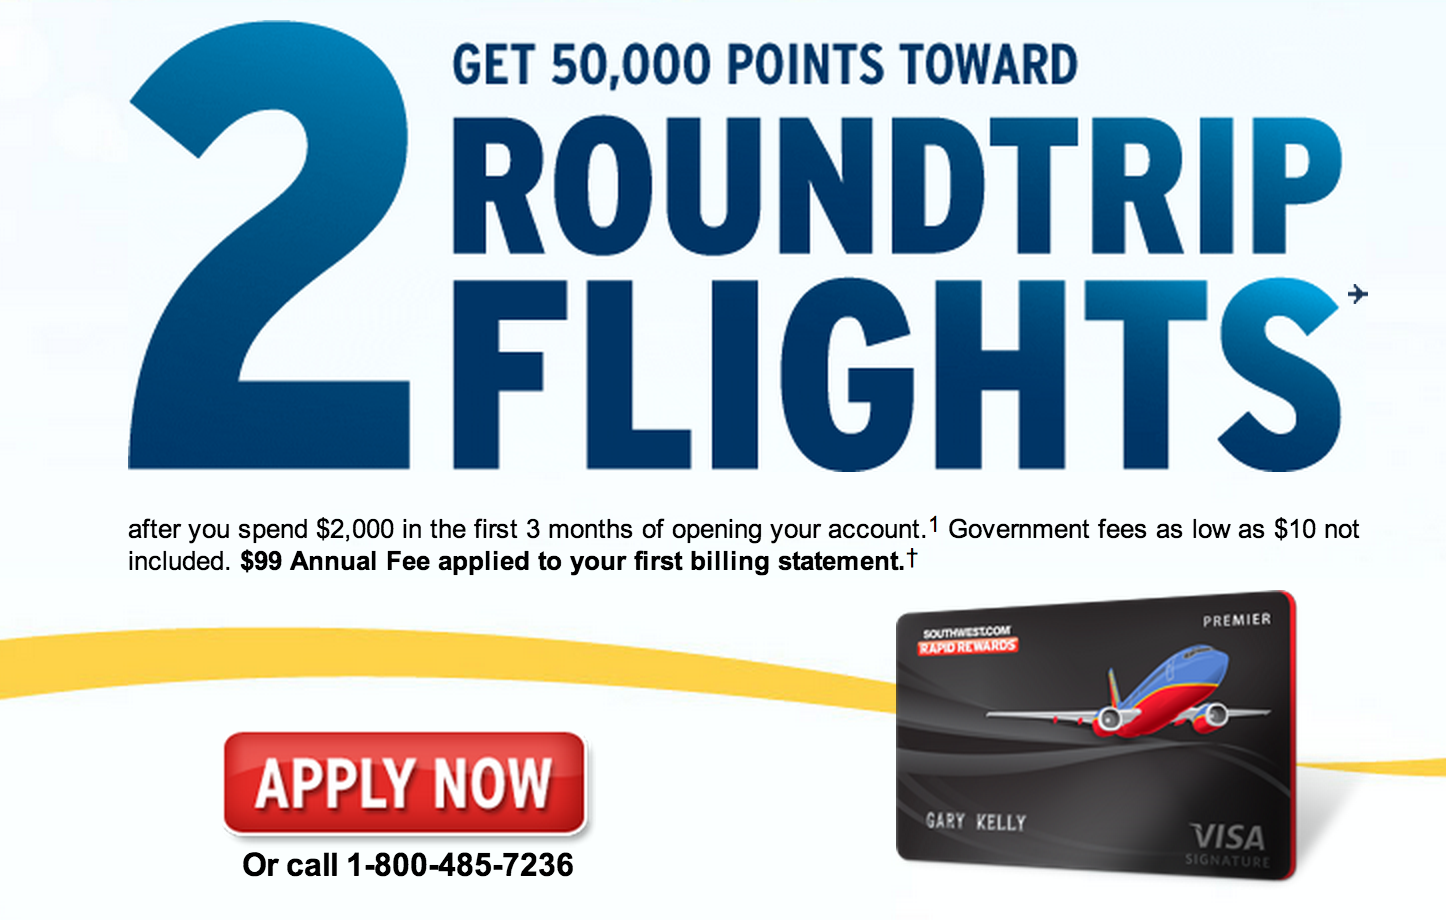 Southwest Airlines Credit Card 50,000 Point Offer Running with Miles